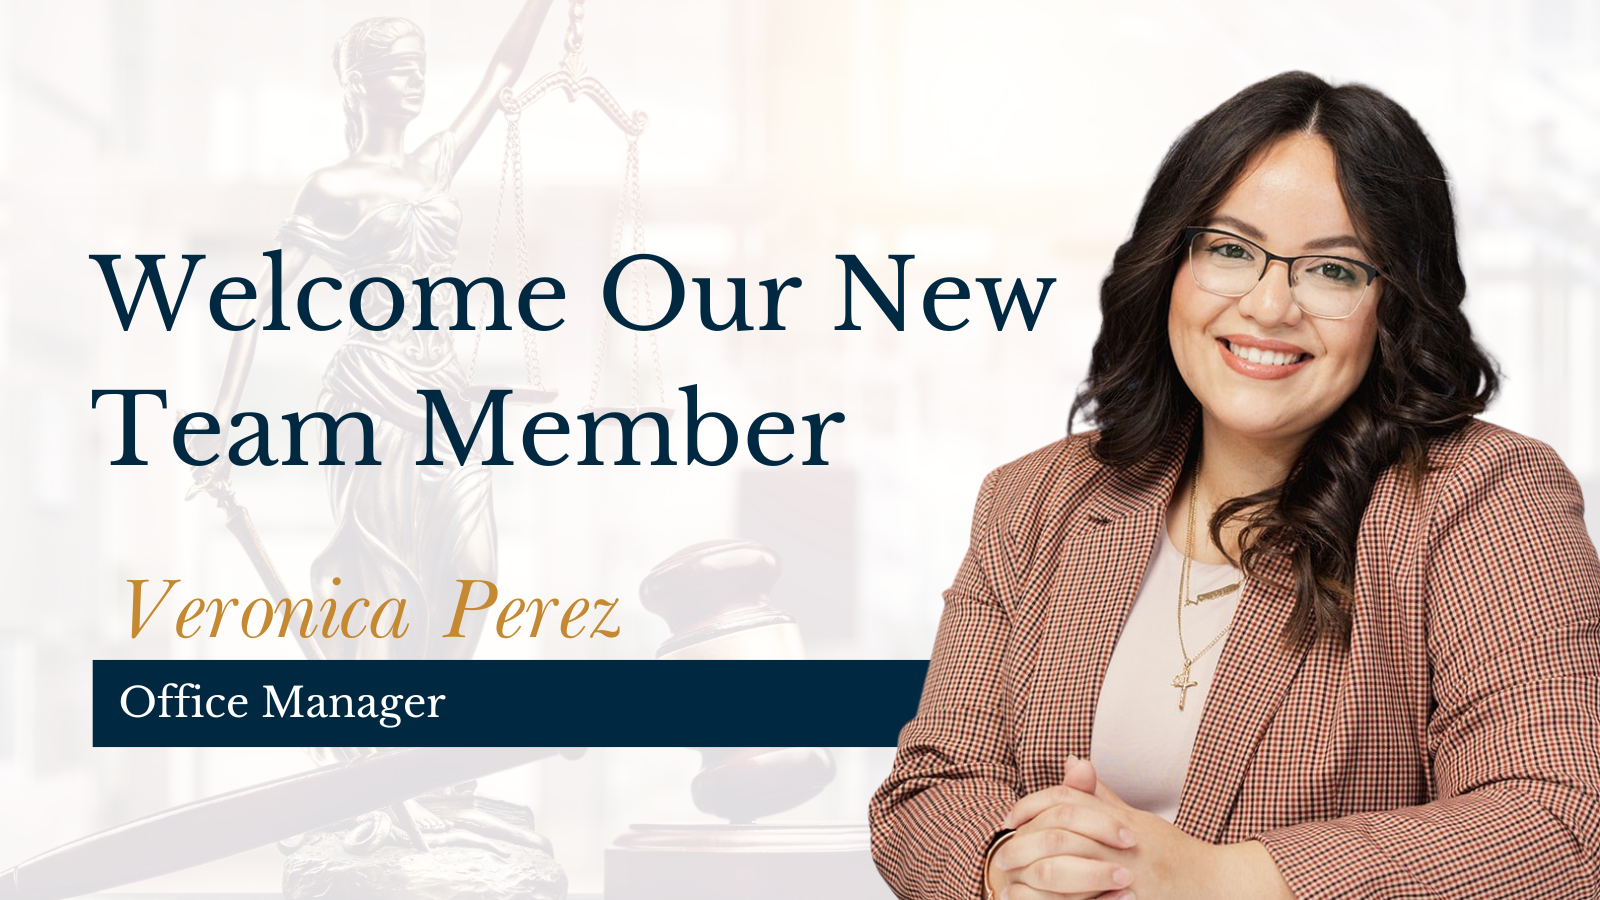 Introducing Veronica Perez: Our New Office Manager on a Mission